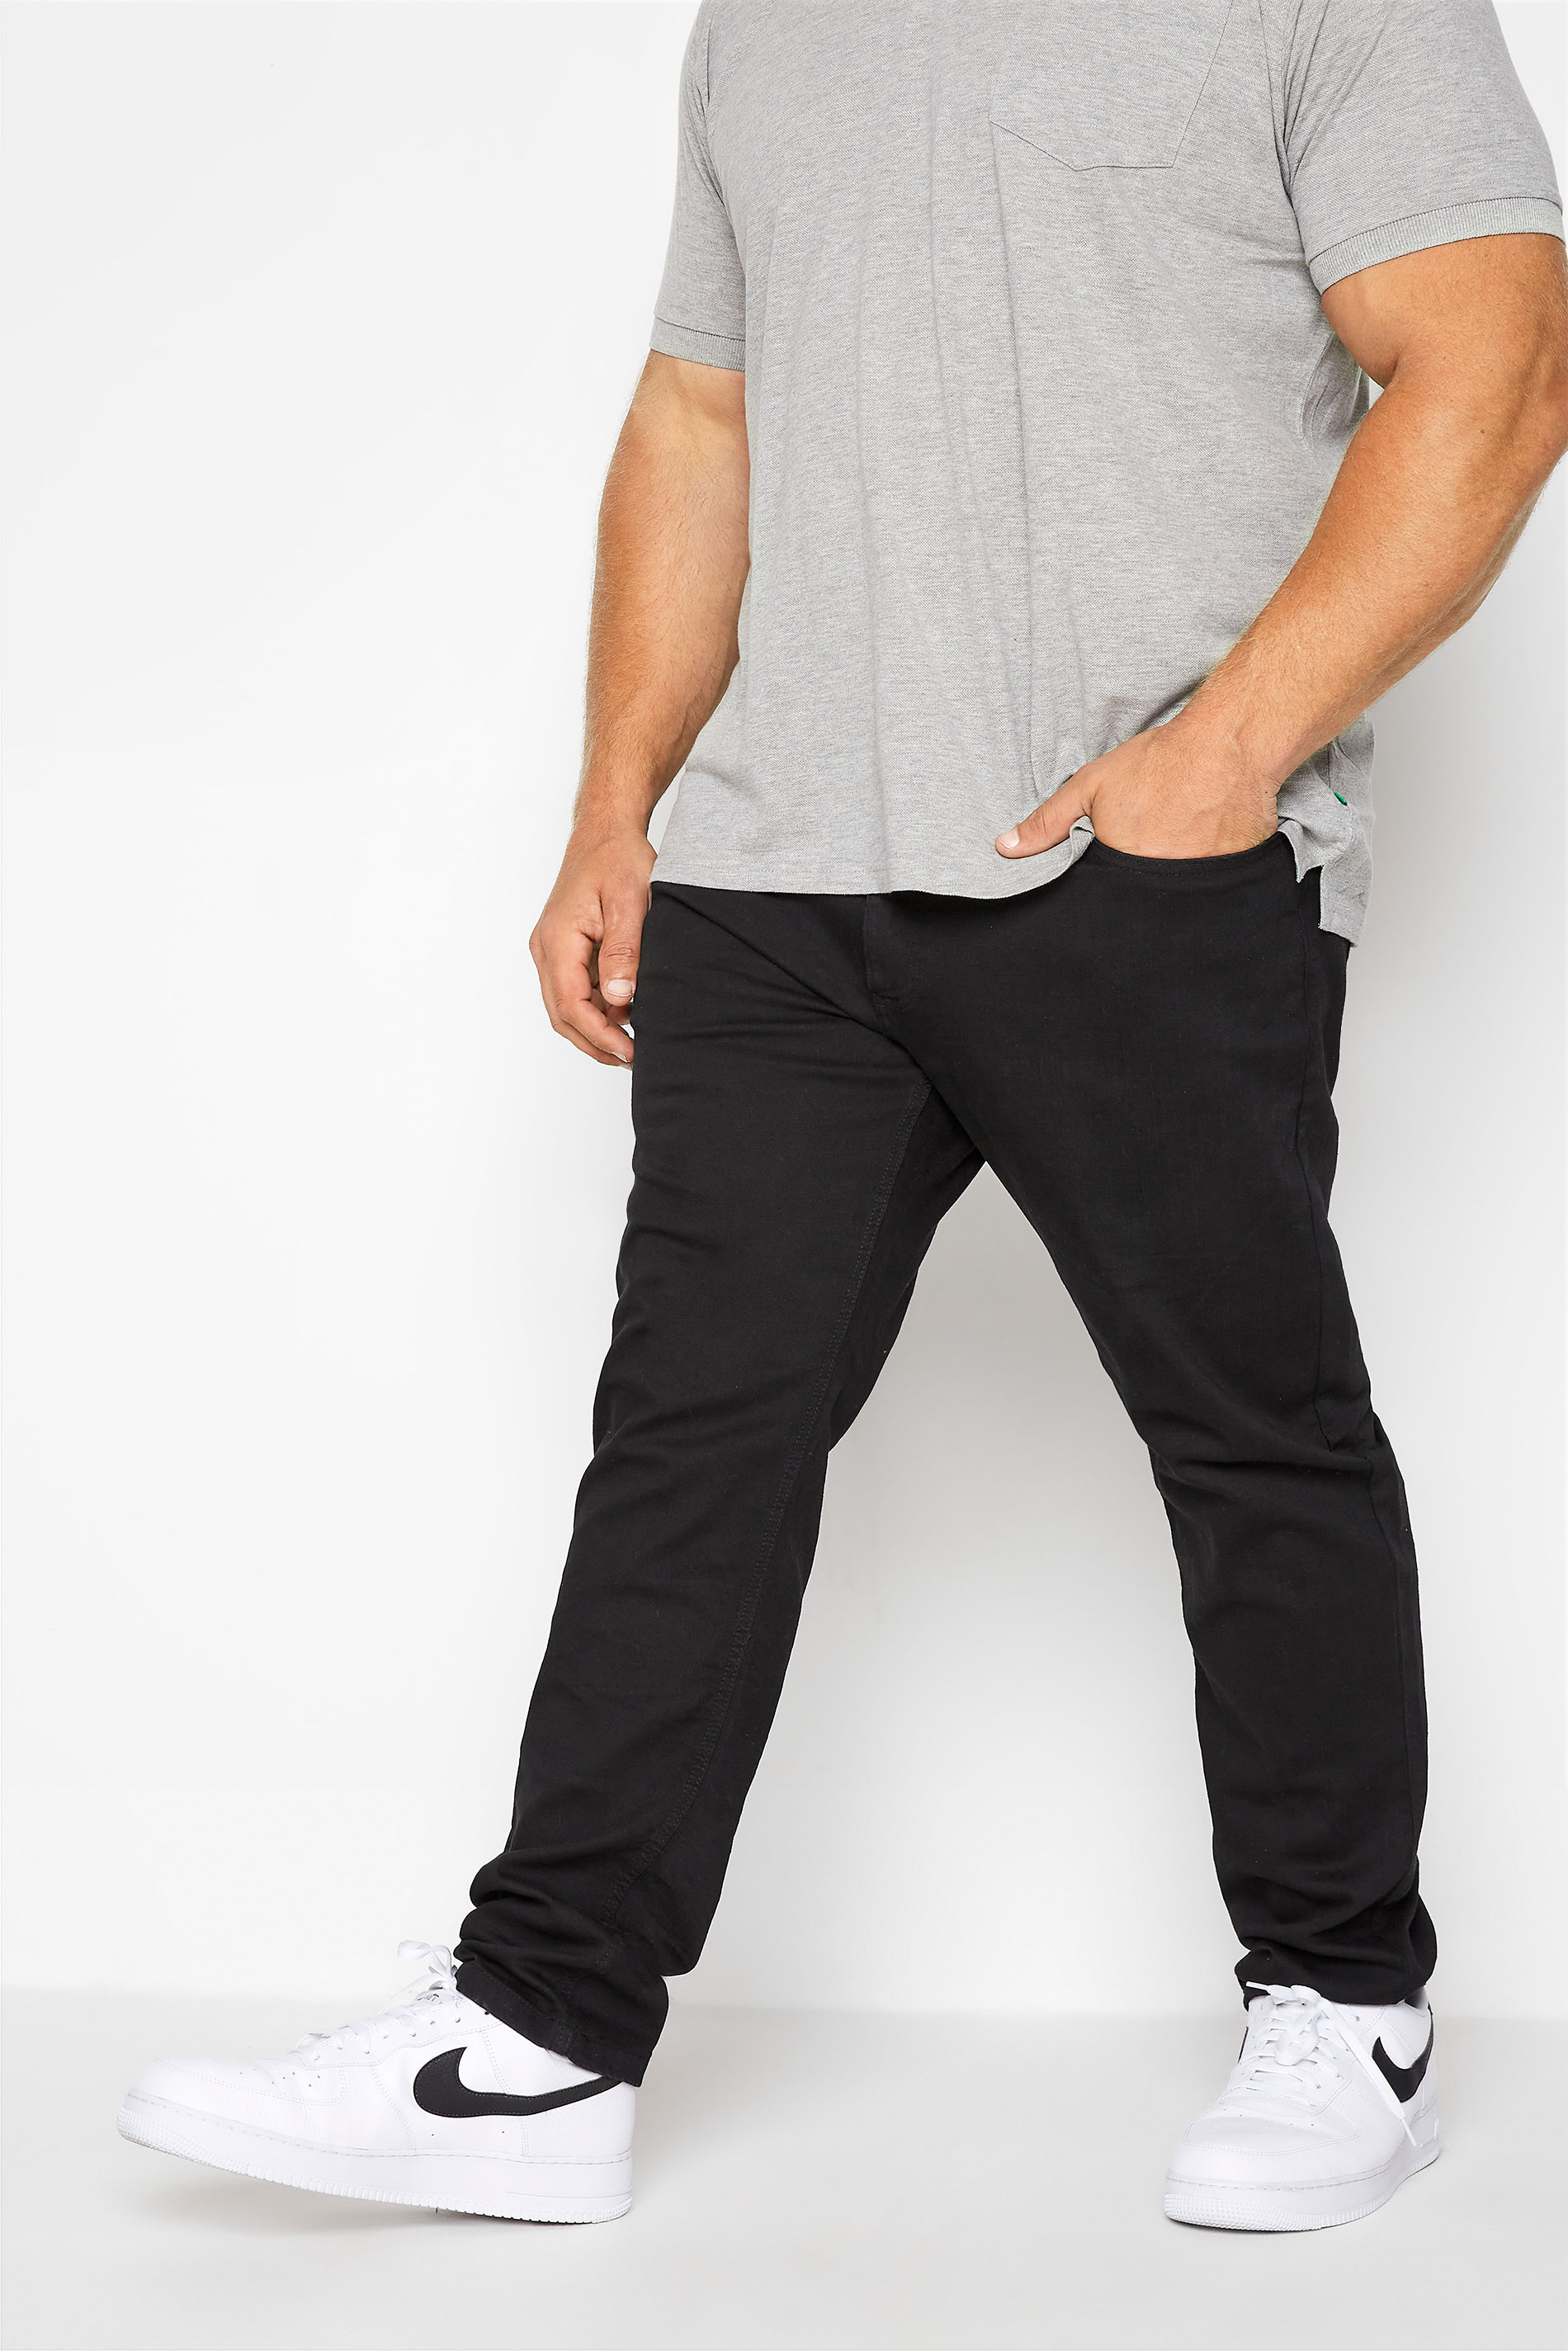 D555 Black Tapered Stretch Jeans | BadRhino 1